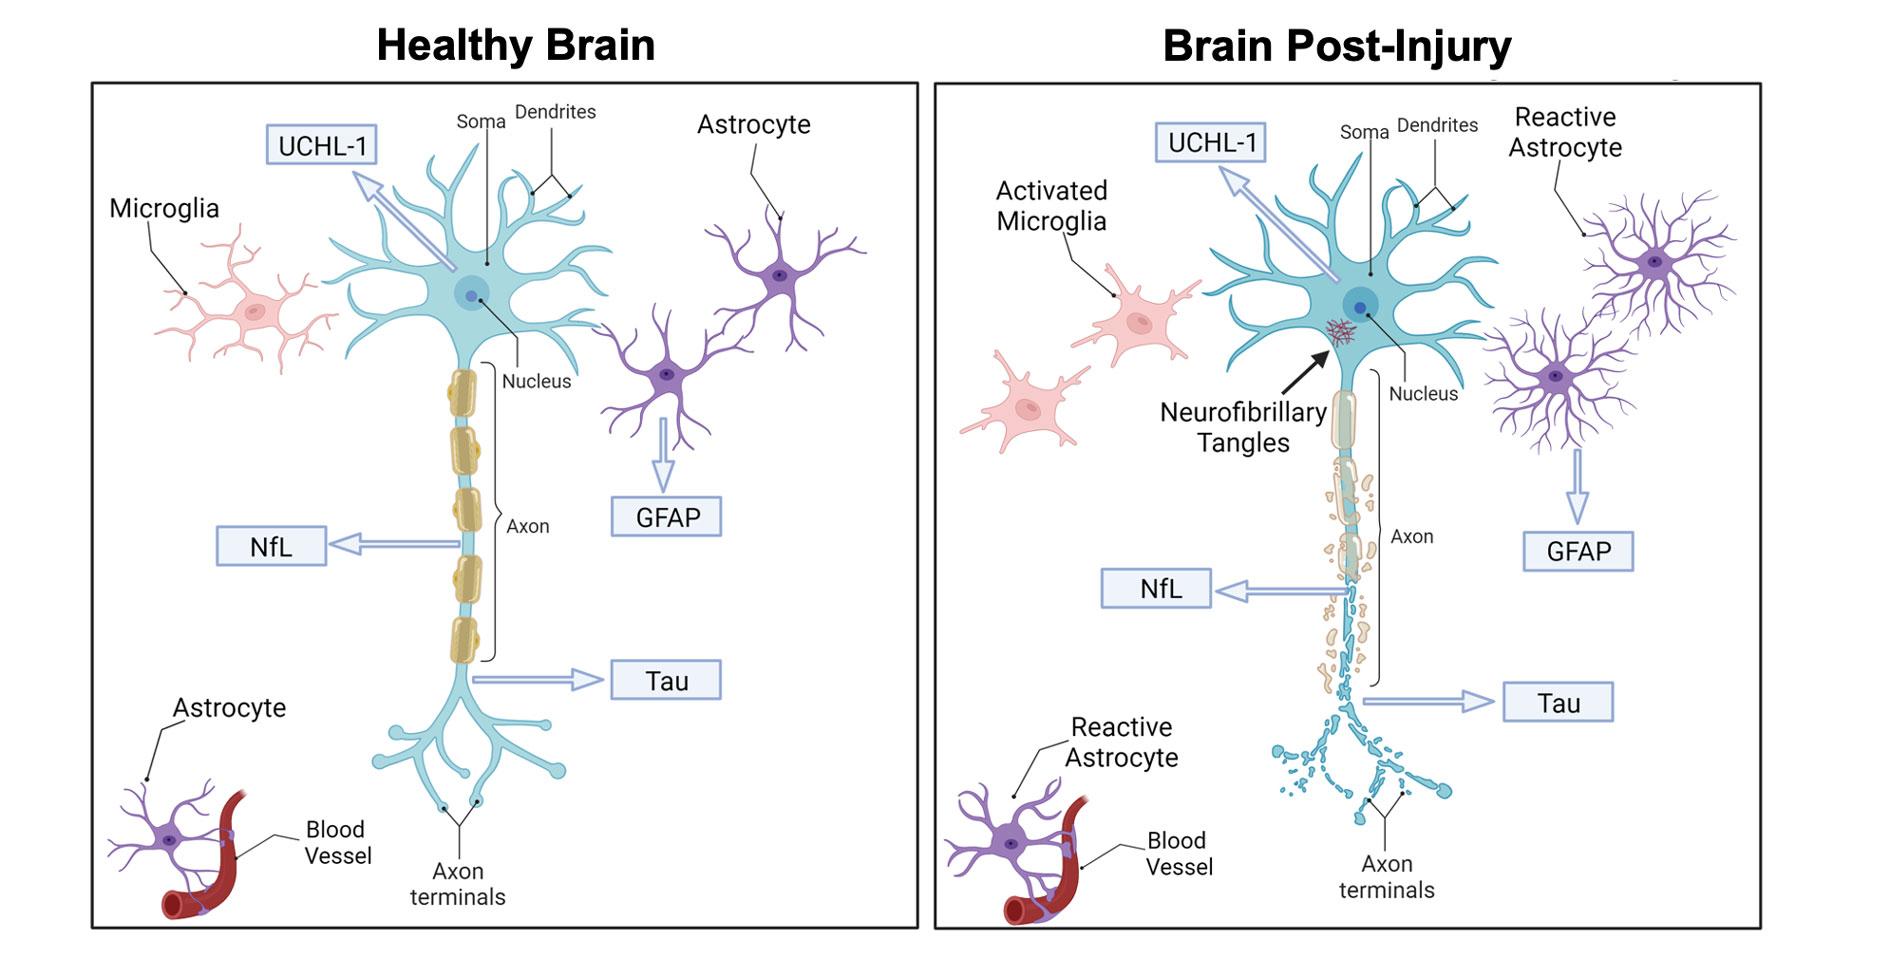 Study figure showing two side-by-side panels: one that shows a brain cell from a healthy brain and one that shows a brain cell post-injury. The post-injury cell contains proteins such as neurofilament light chain (NfL), tau, and glial fibrillary acidic protein (GFAP) that are linked to neurodegenerative changes and astrocyte activation.